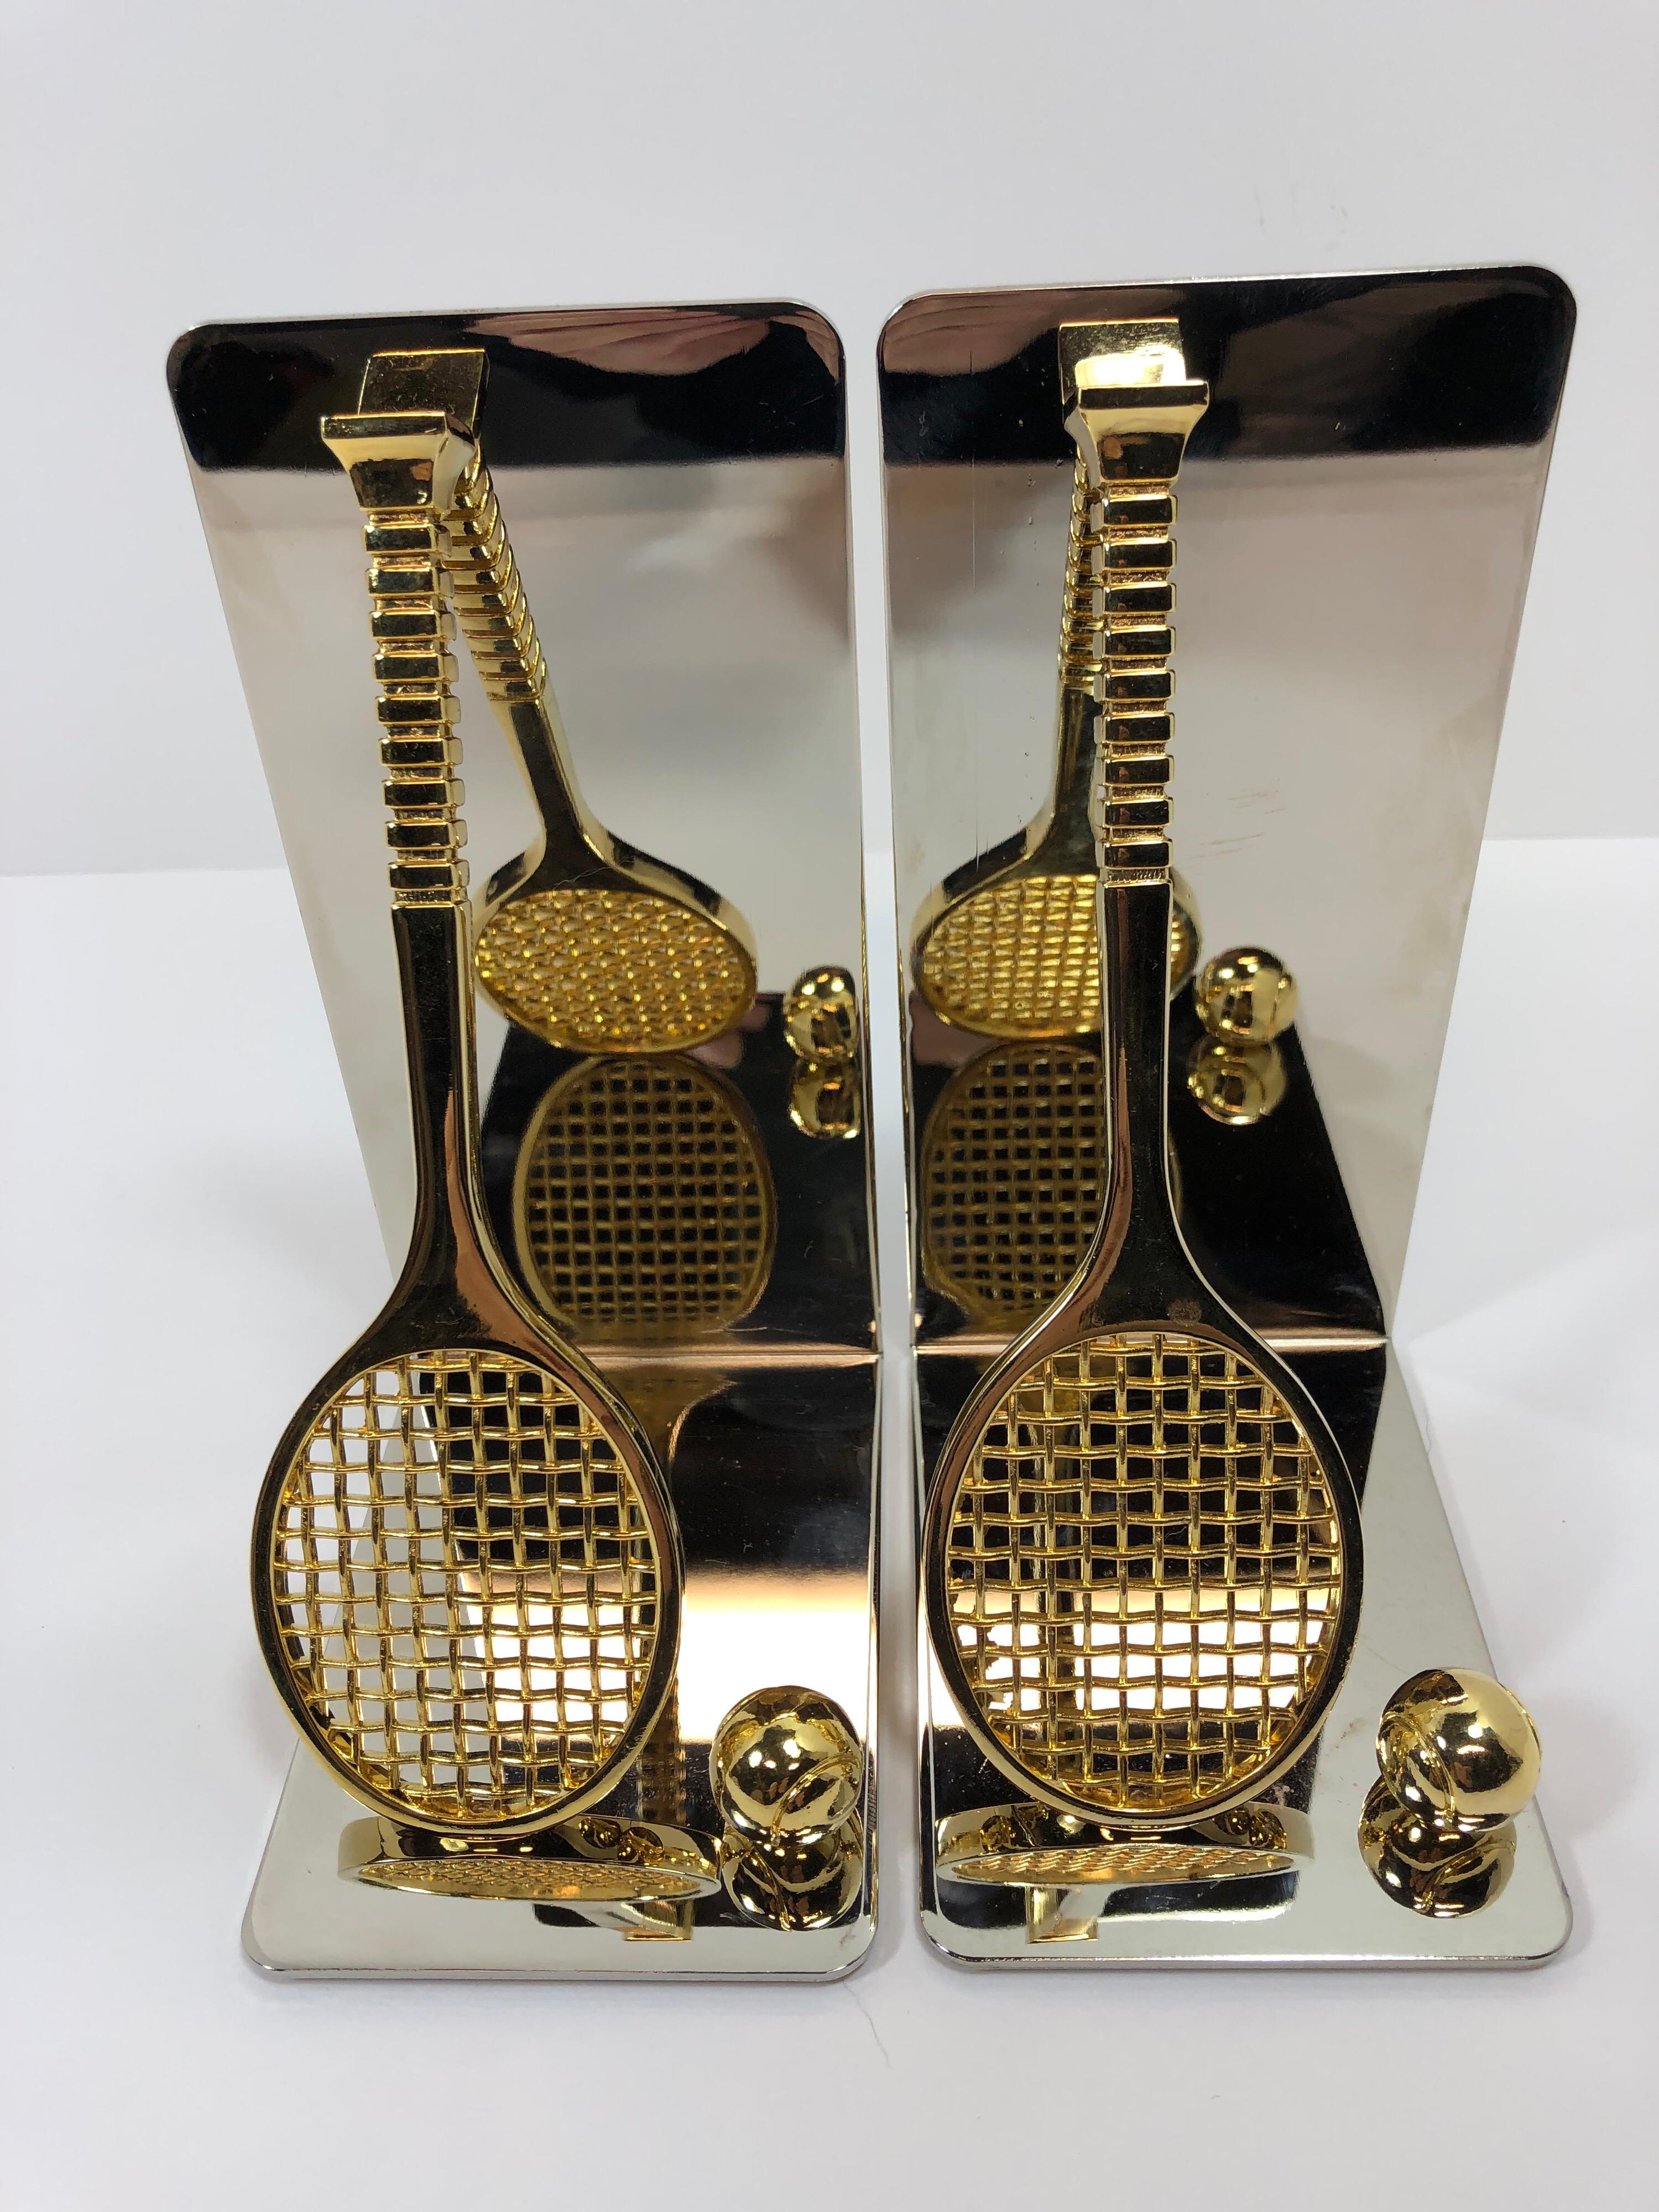 Set of brass and chrome tennis racket bookends. Has thin foam on bottom to prevent scratching furniture.